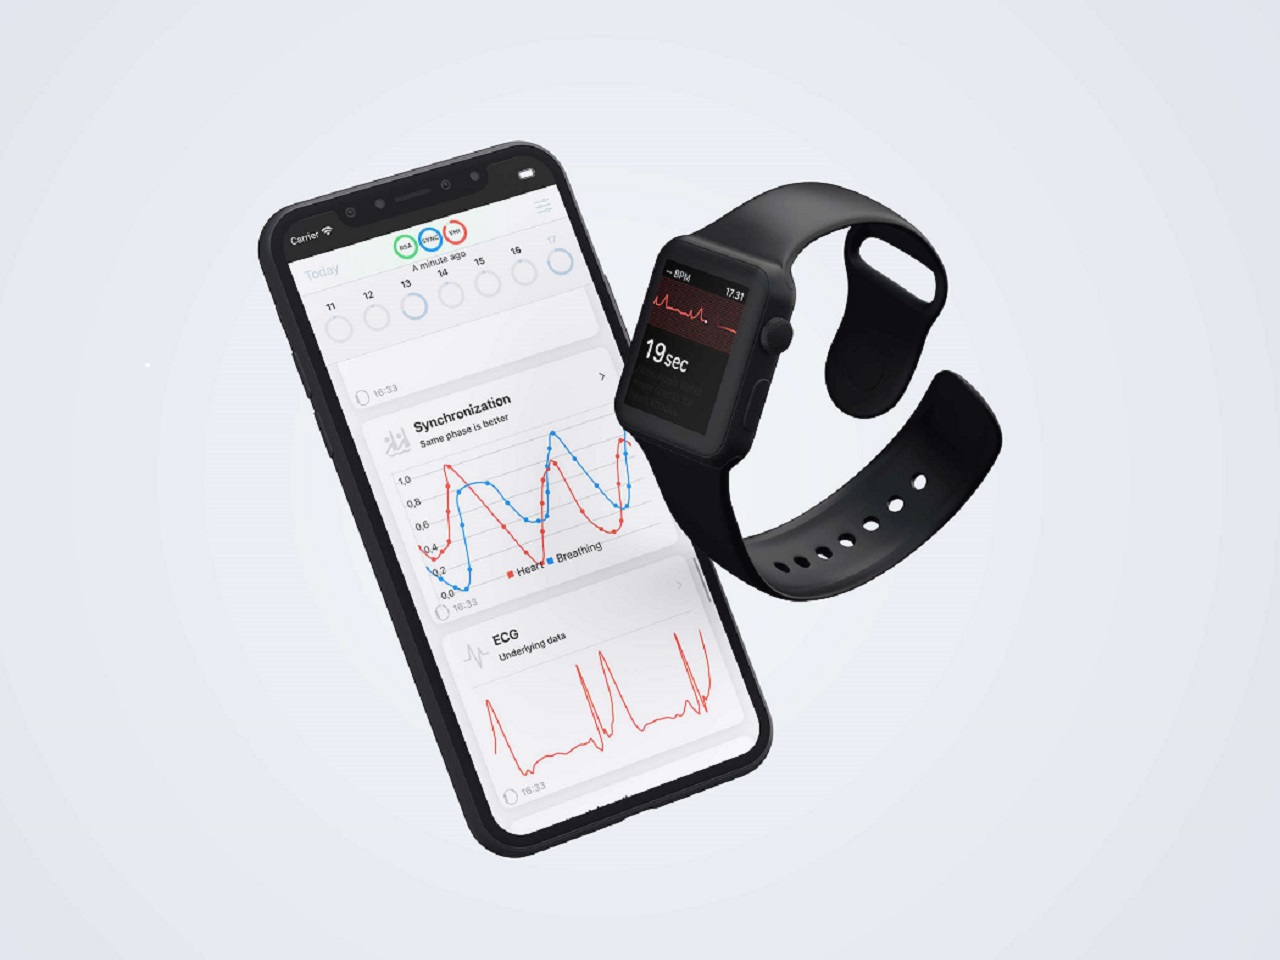 A new type of app for Apple Watch: 'VAGUS ECG - helping your health'